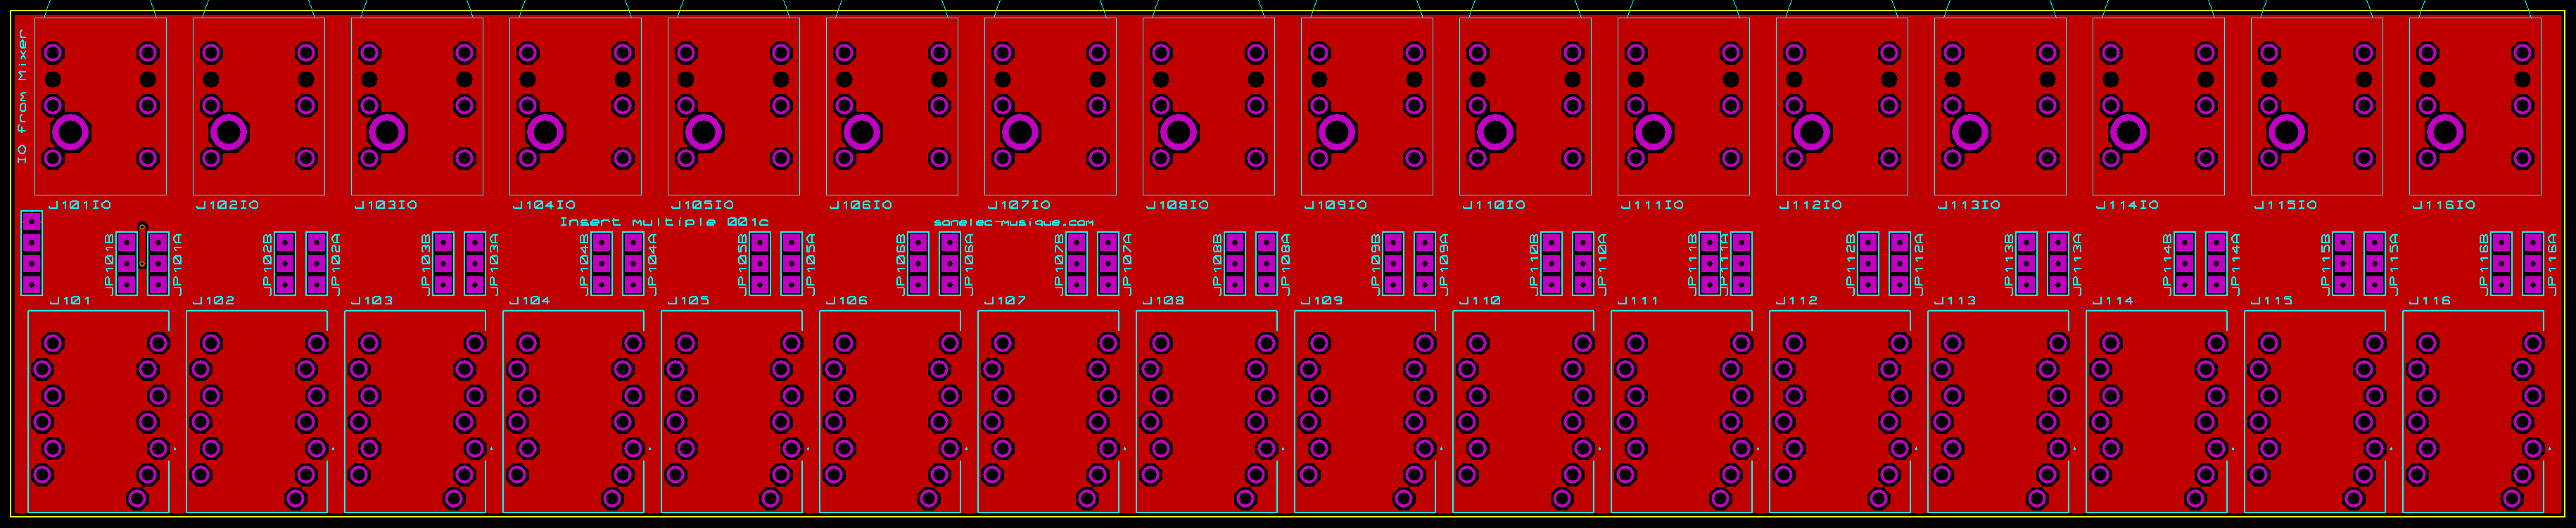 insert_multiple_001c_pcb_components_top